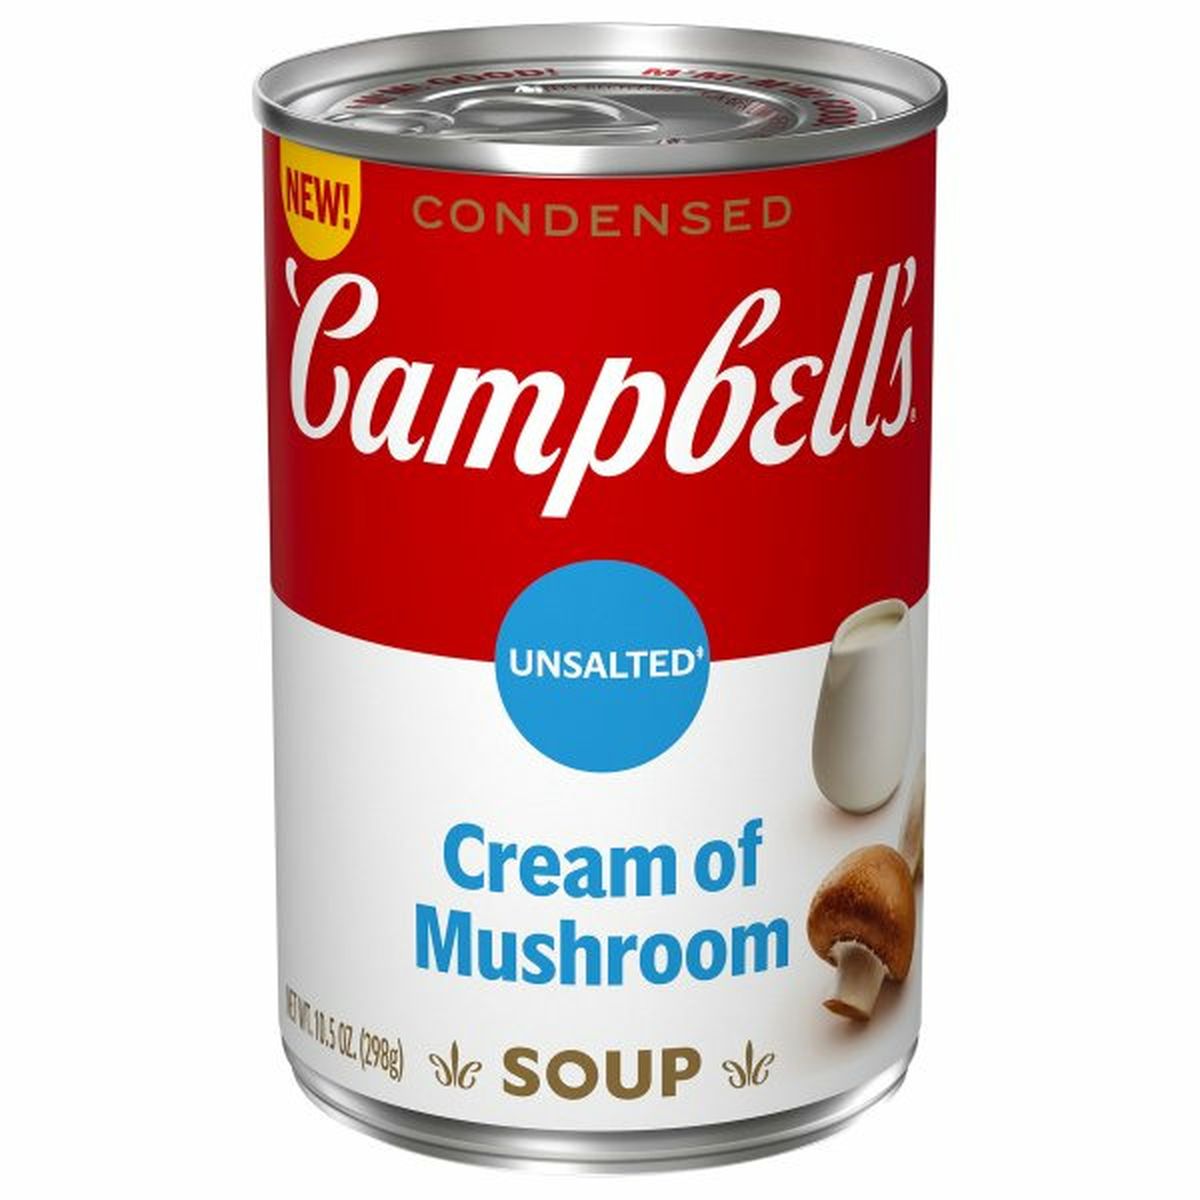 Calories in Campbell'ss Condensed Soup, Cream of Mushroom, Unsalted